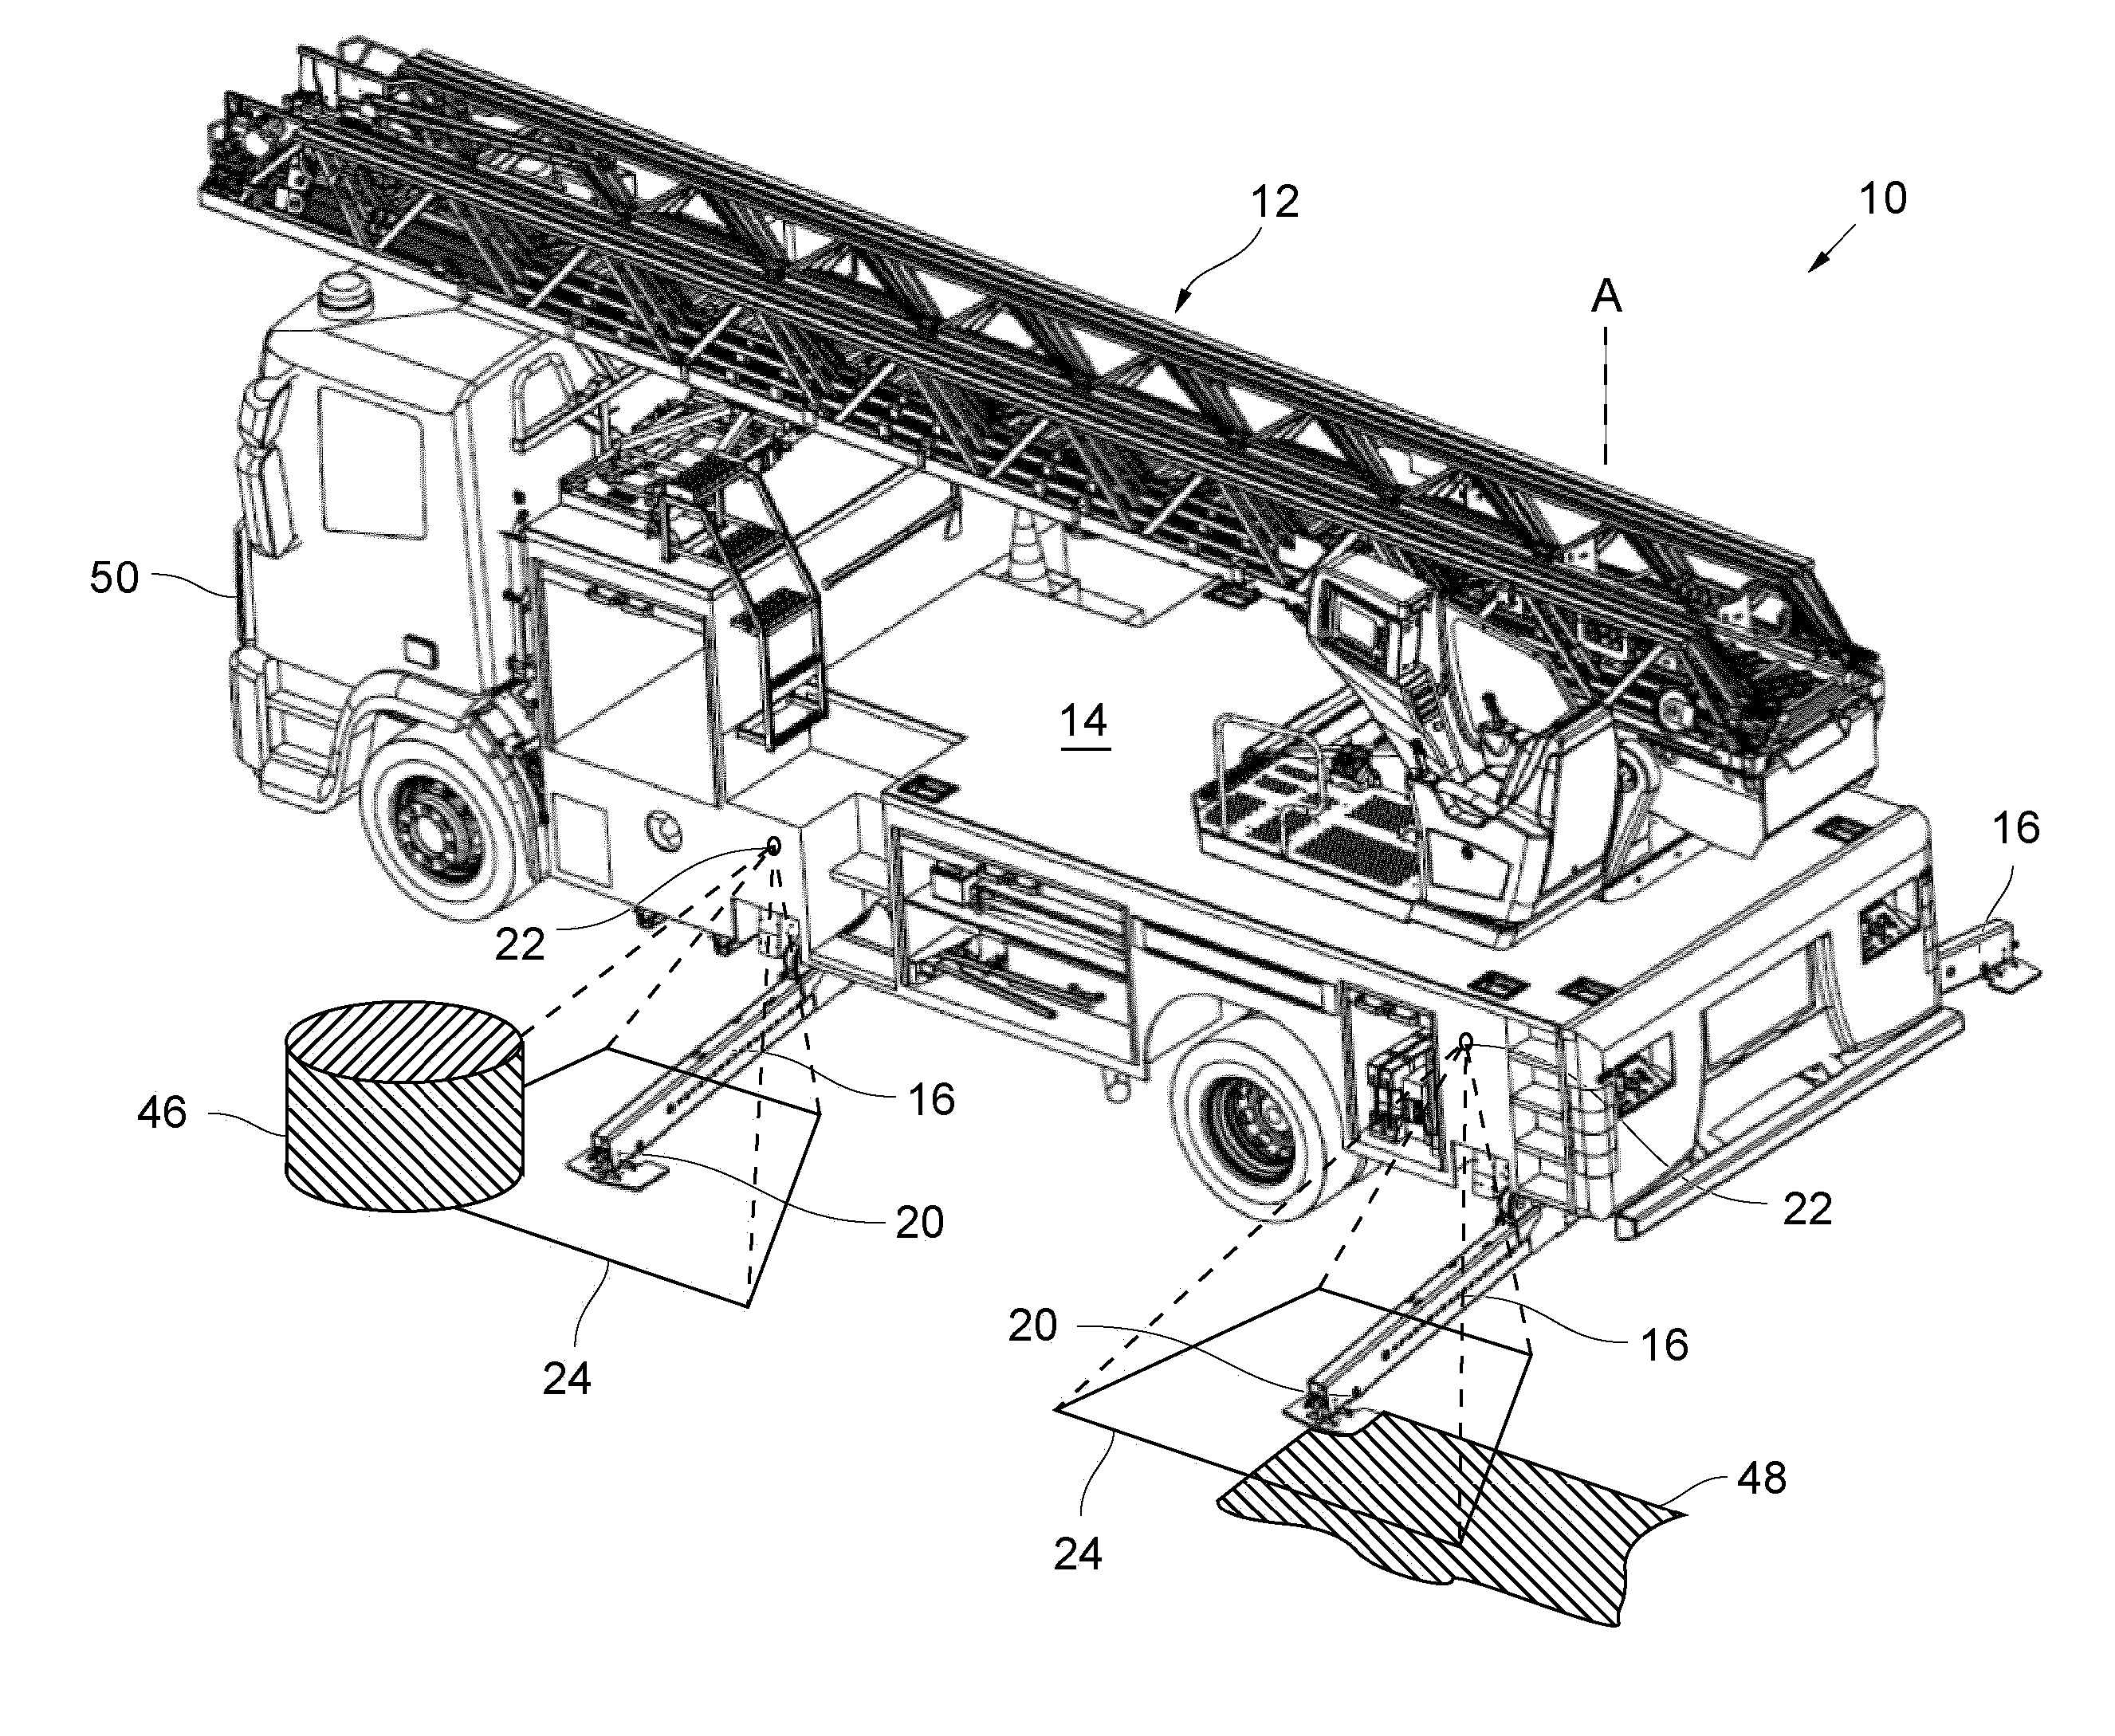 Utility vehicle with monitoring system for monitoring the position of the vehicle